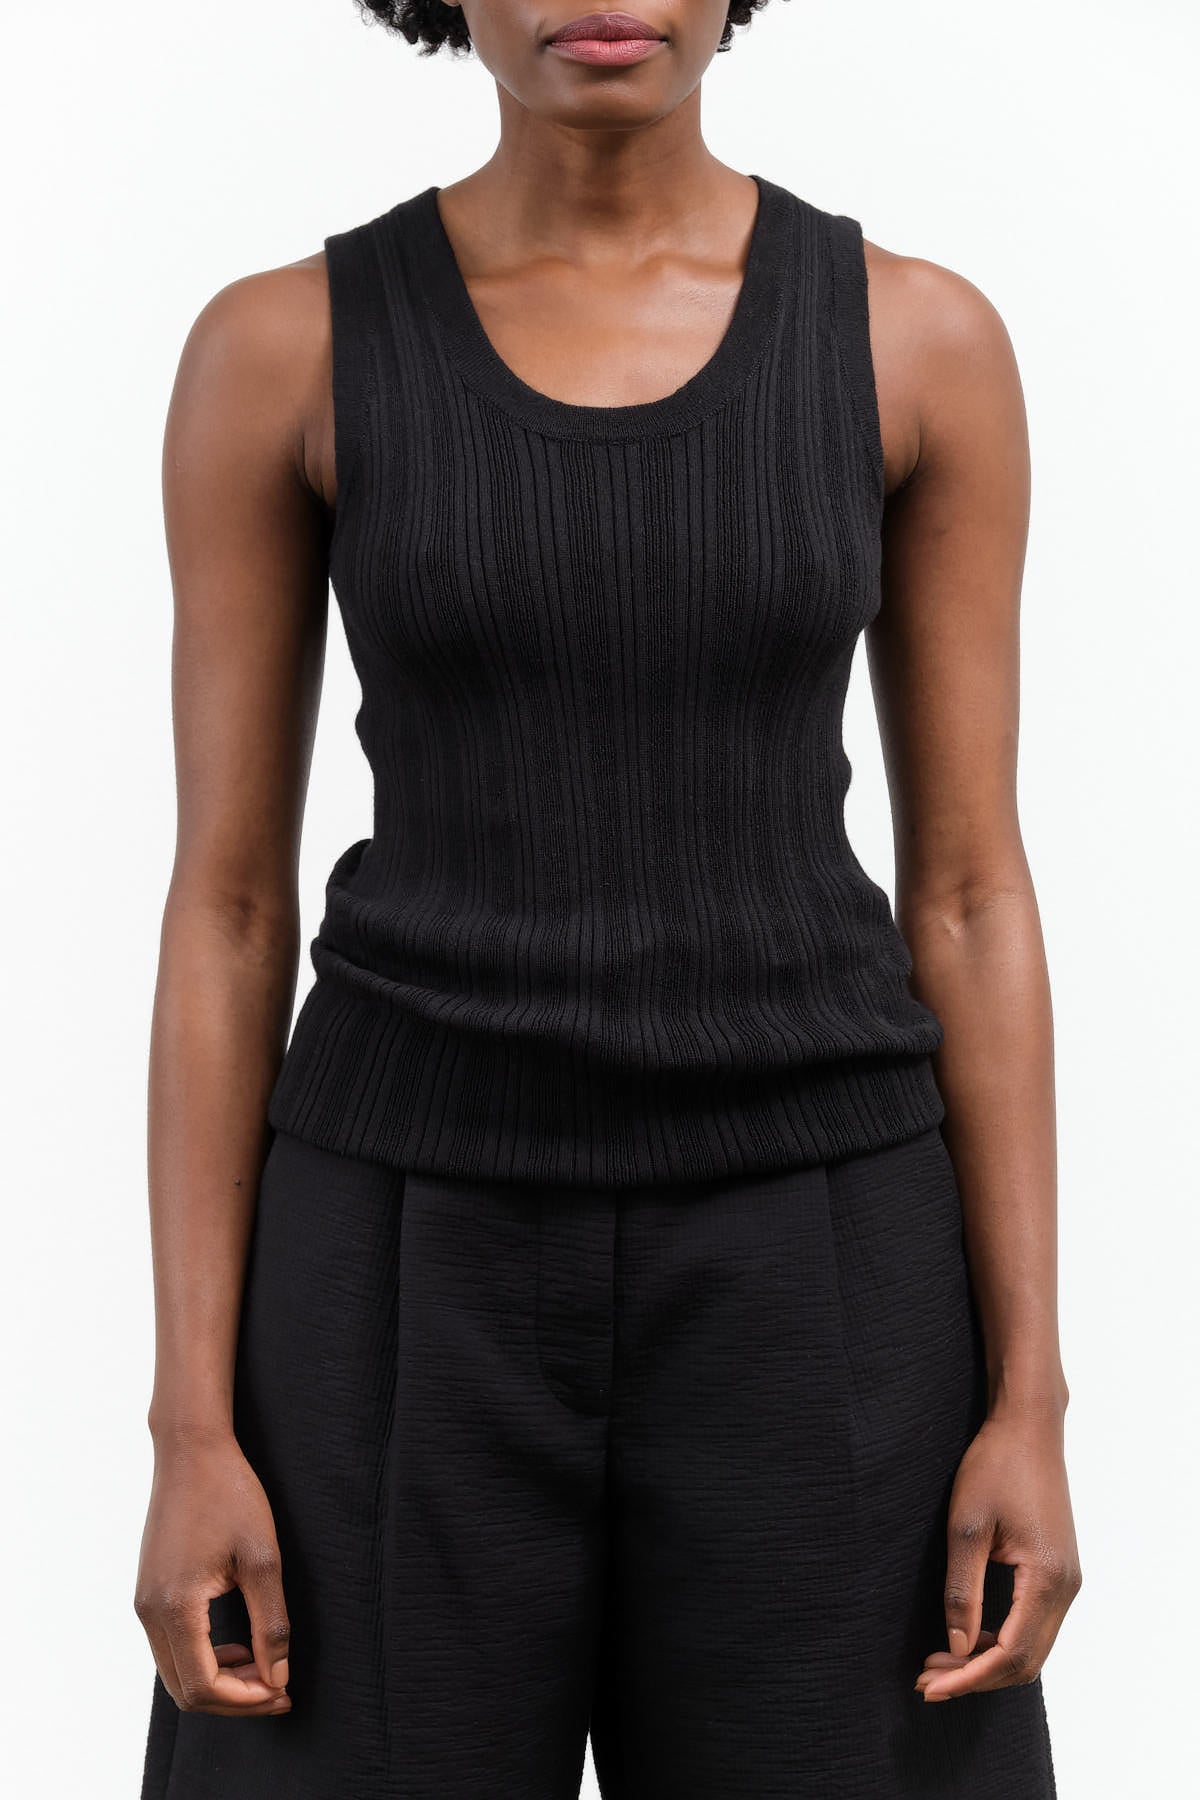 Pointelle Relaxed Tank by Atelier Delphine in Black